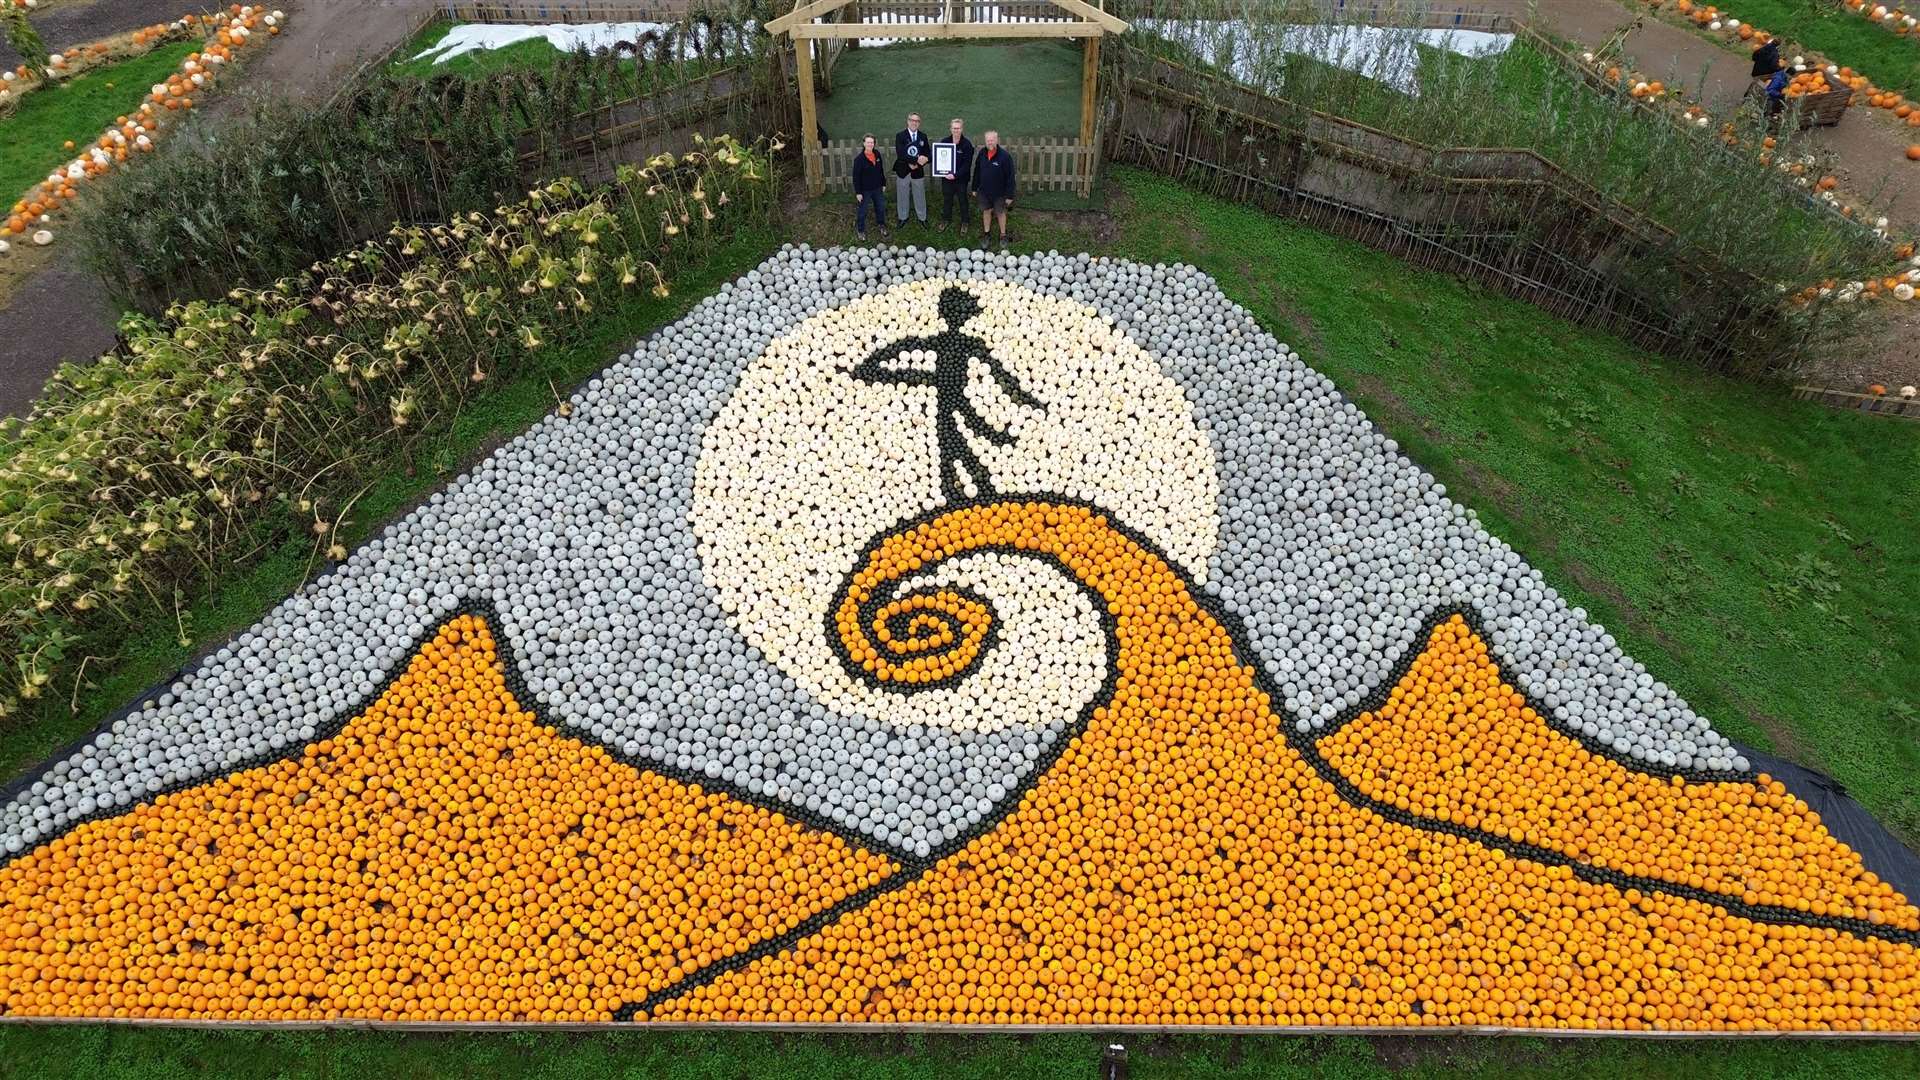 The mosaic is made up of different pumpkin and squash varieties (Guinness World Records)